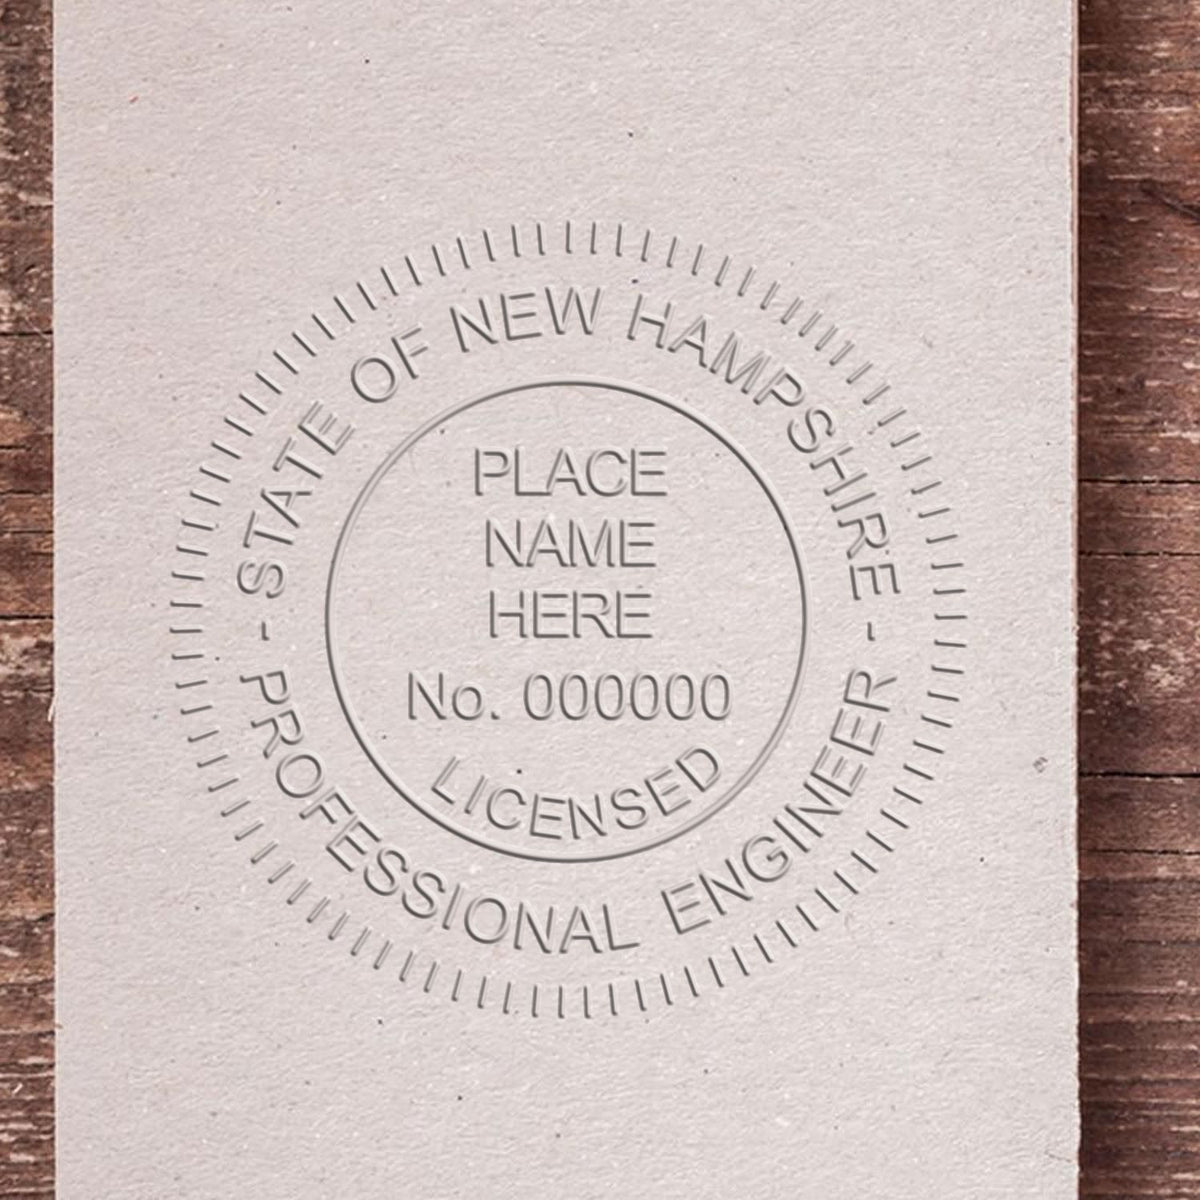 The Heavy Duty Cast Iron New Hampshire Engineer Seal Embosser stamp impression comes to life with a crisp, detailed photo on paper - showcasing true professional quality.